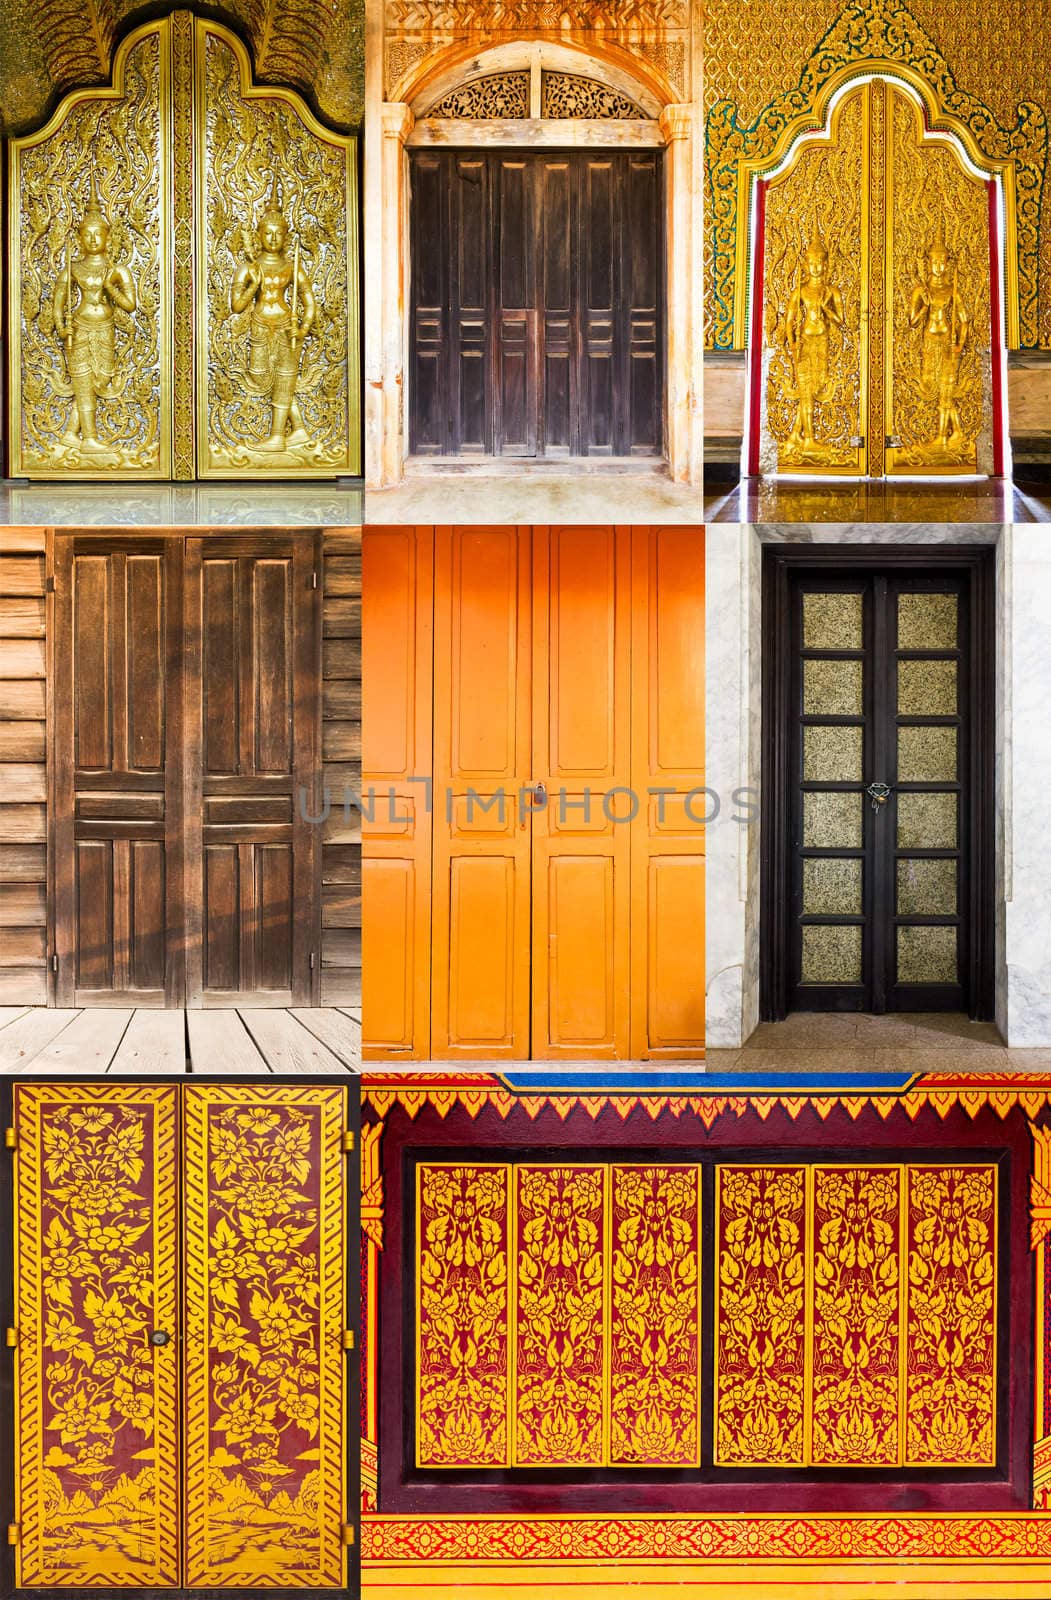 Total door stly thai in temple ,Thailand